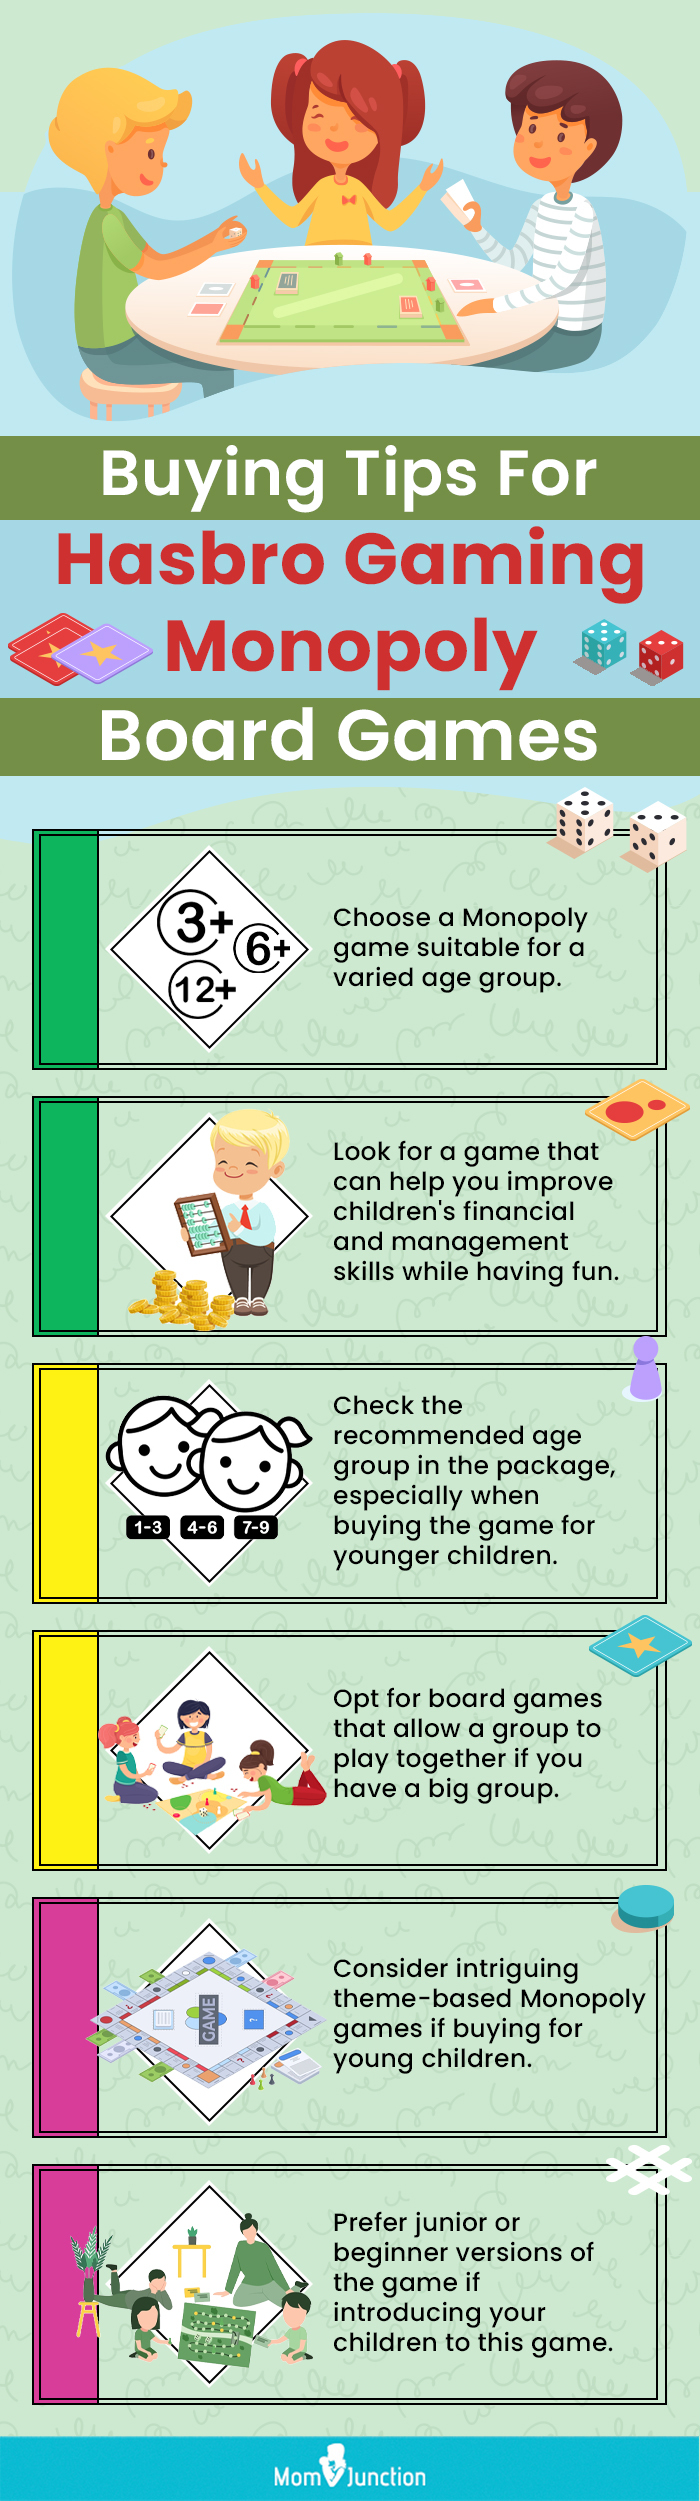 Buying Tips For Hasbro Gaming Monopoly Board Games (infographic)